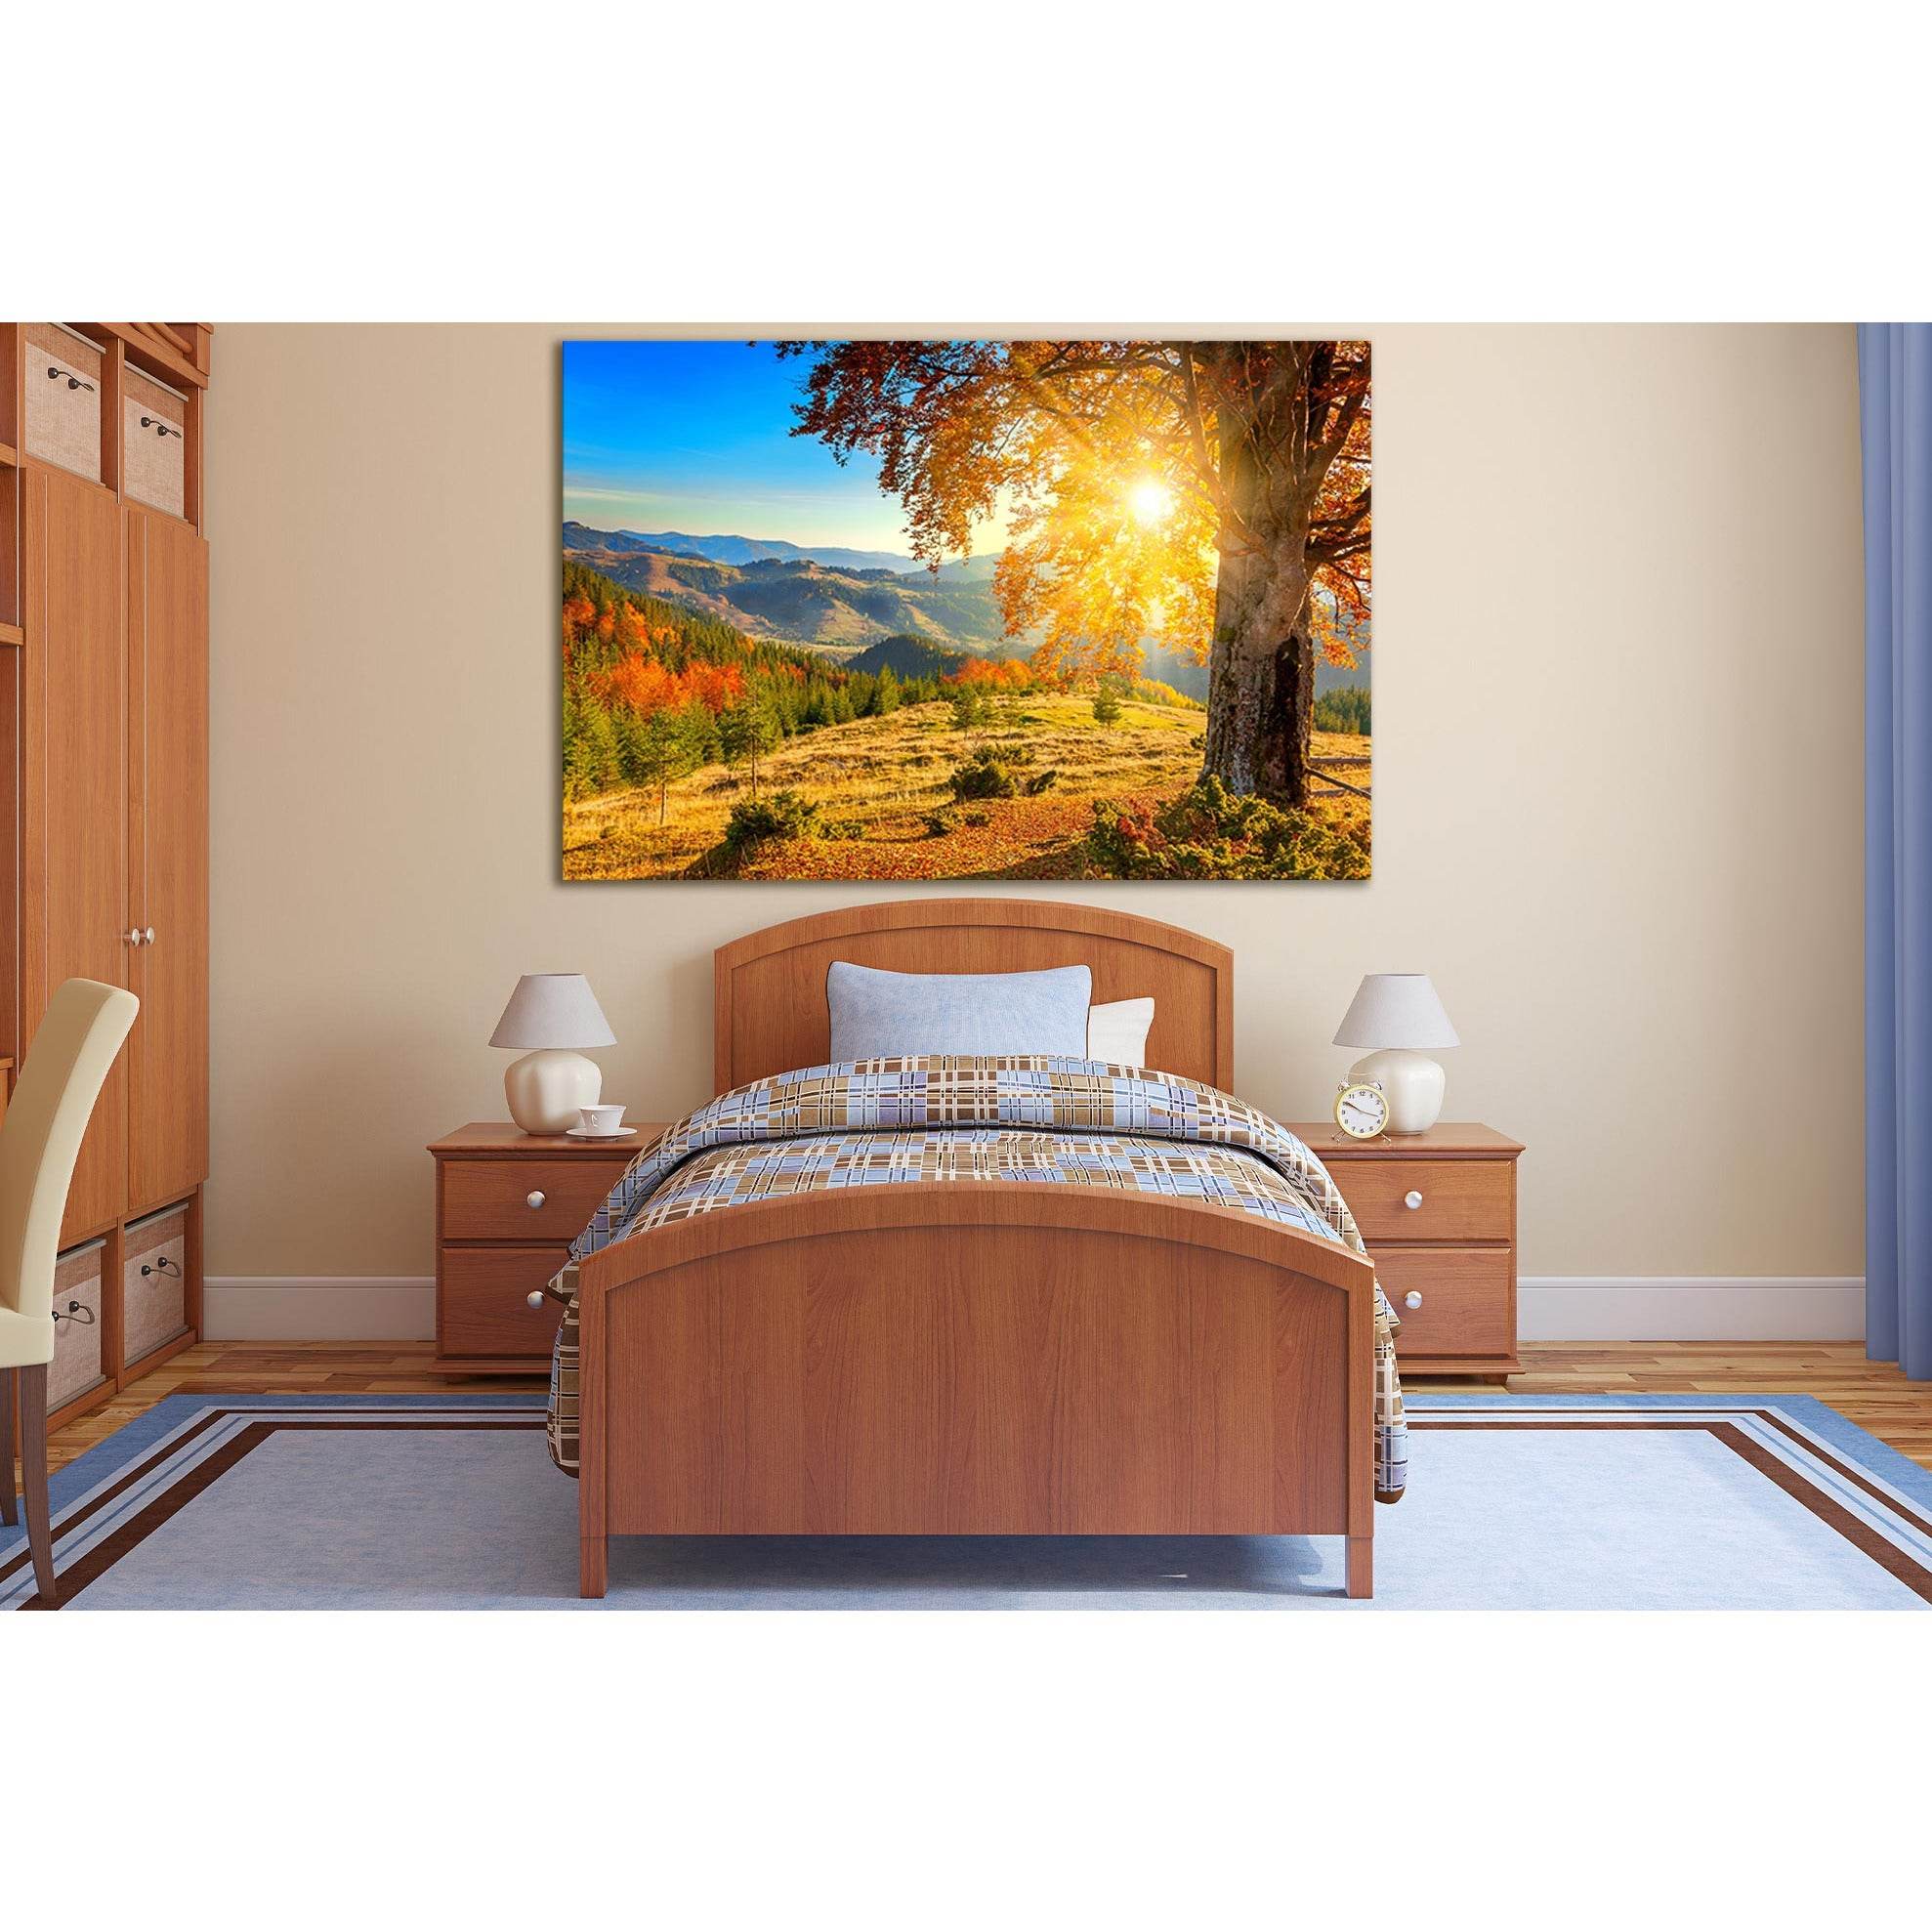 Early Autumn Morning №SL1499 Ready to Hang Canvas Print